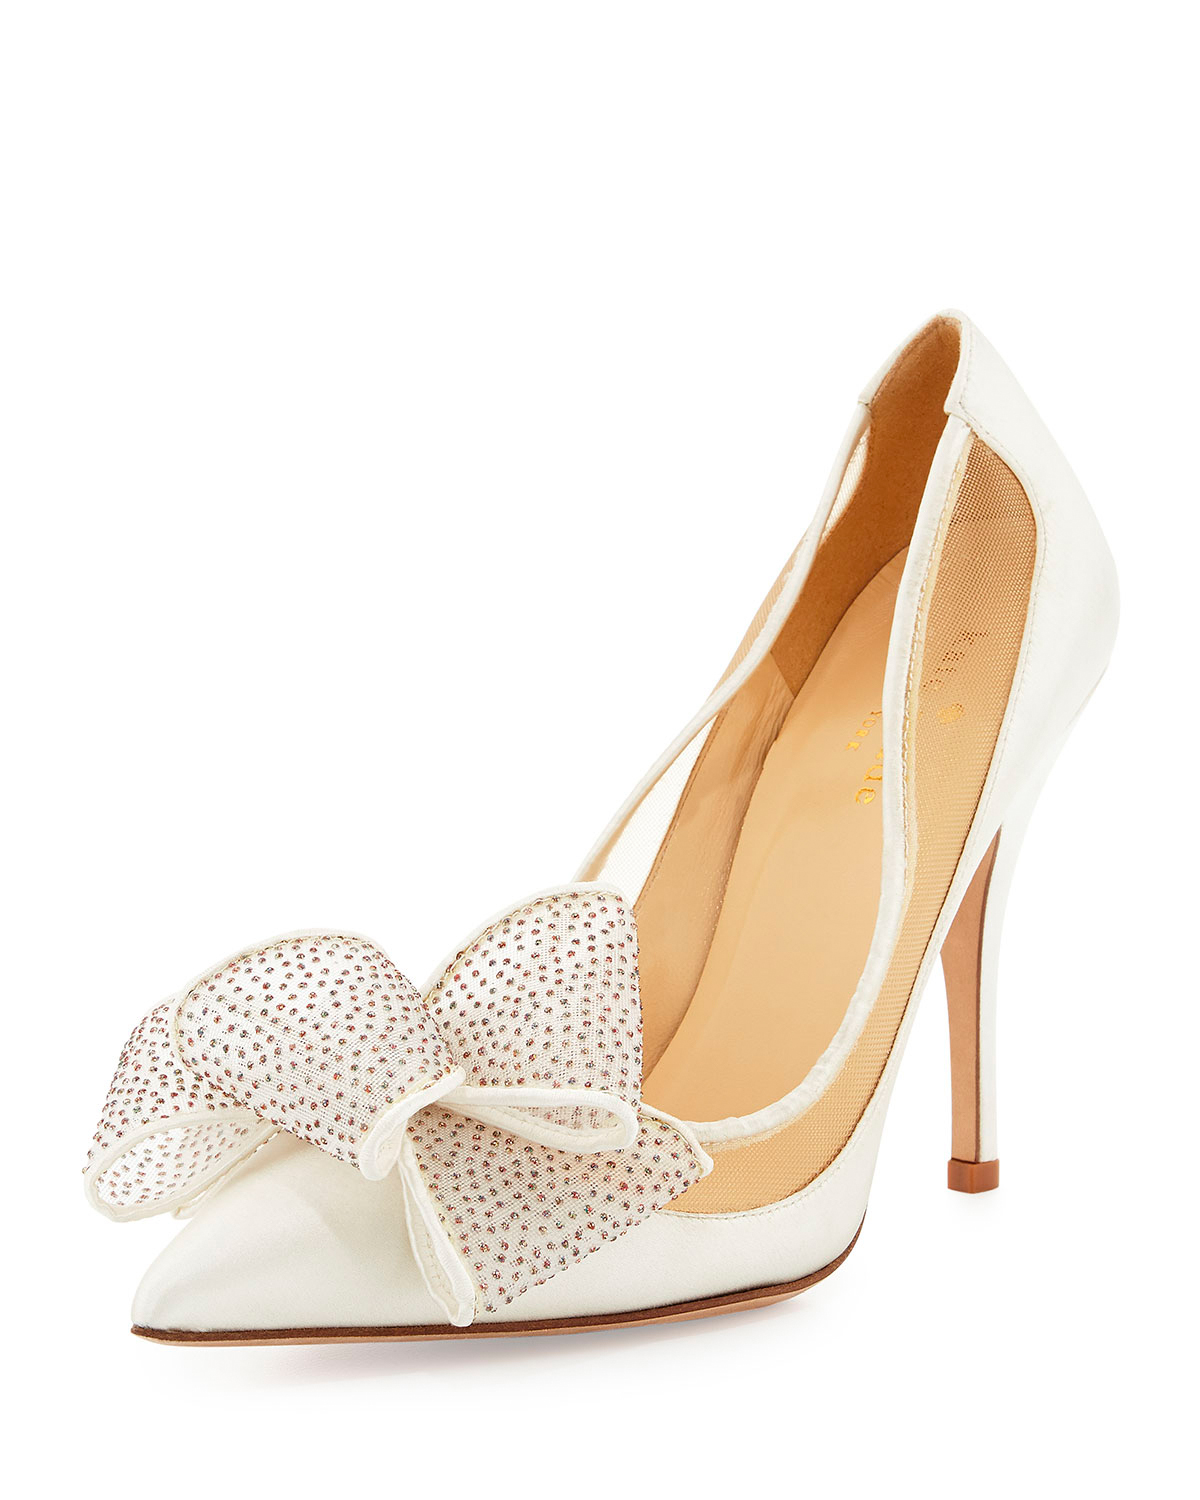 12 Wedding Shoes That Are a Sheer Delight | Martha Stewart Weddings